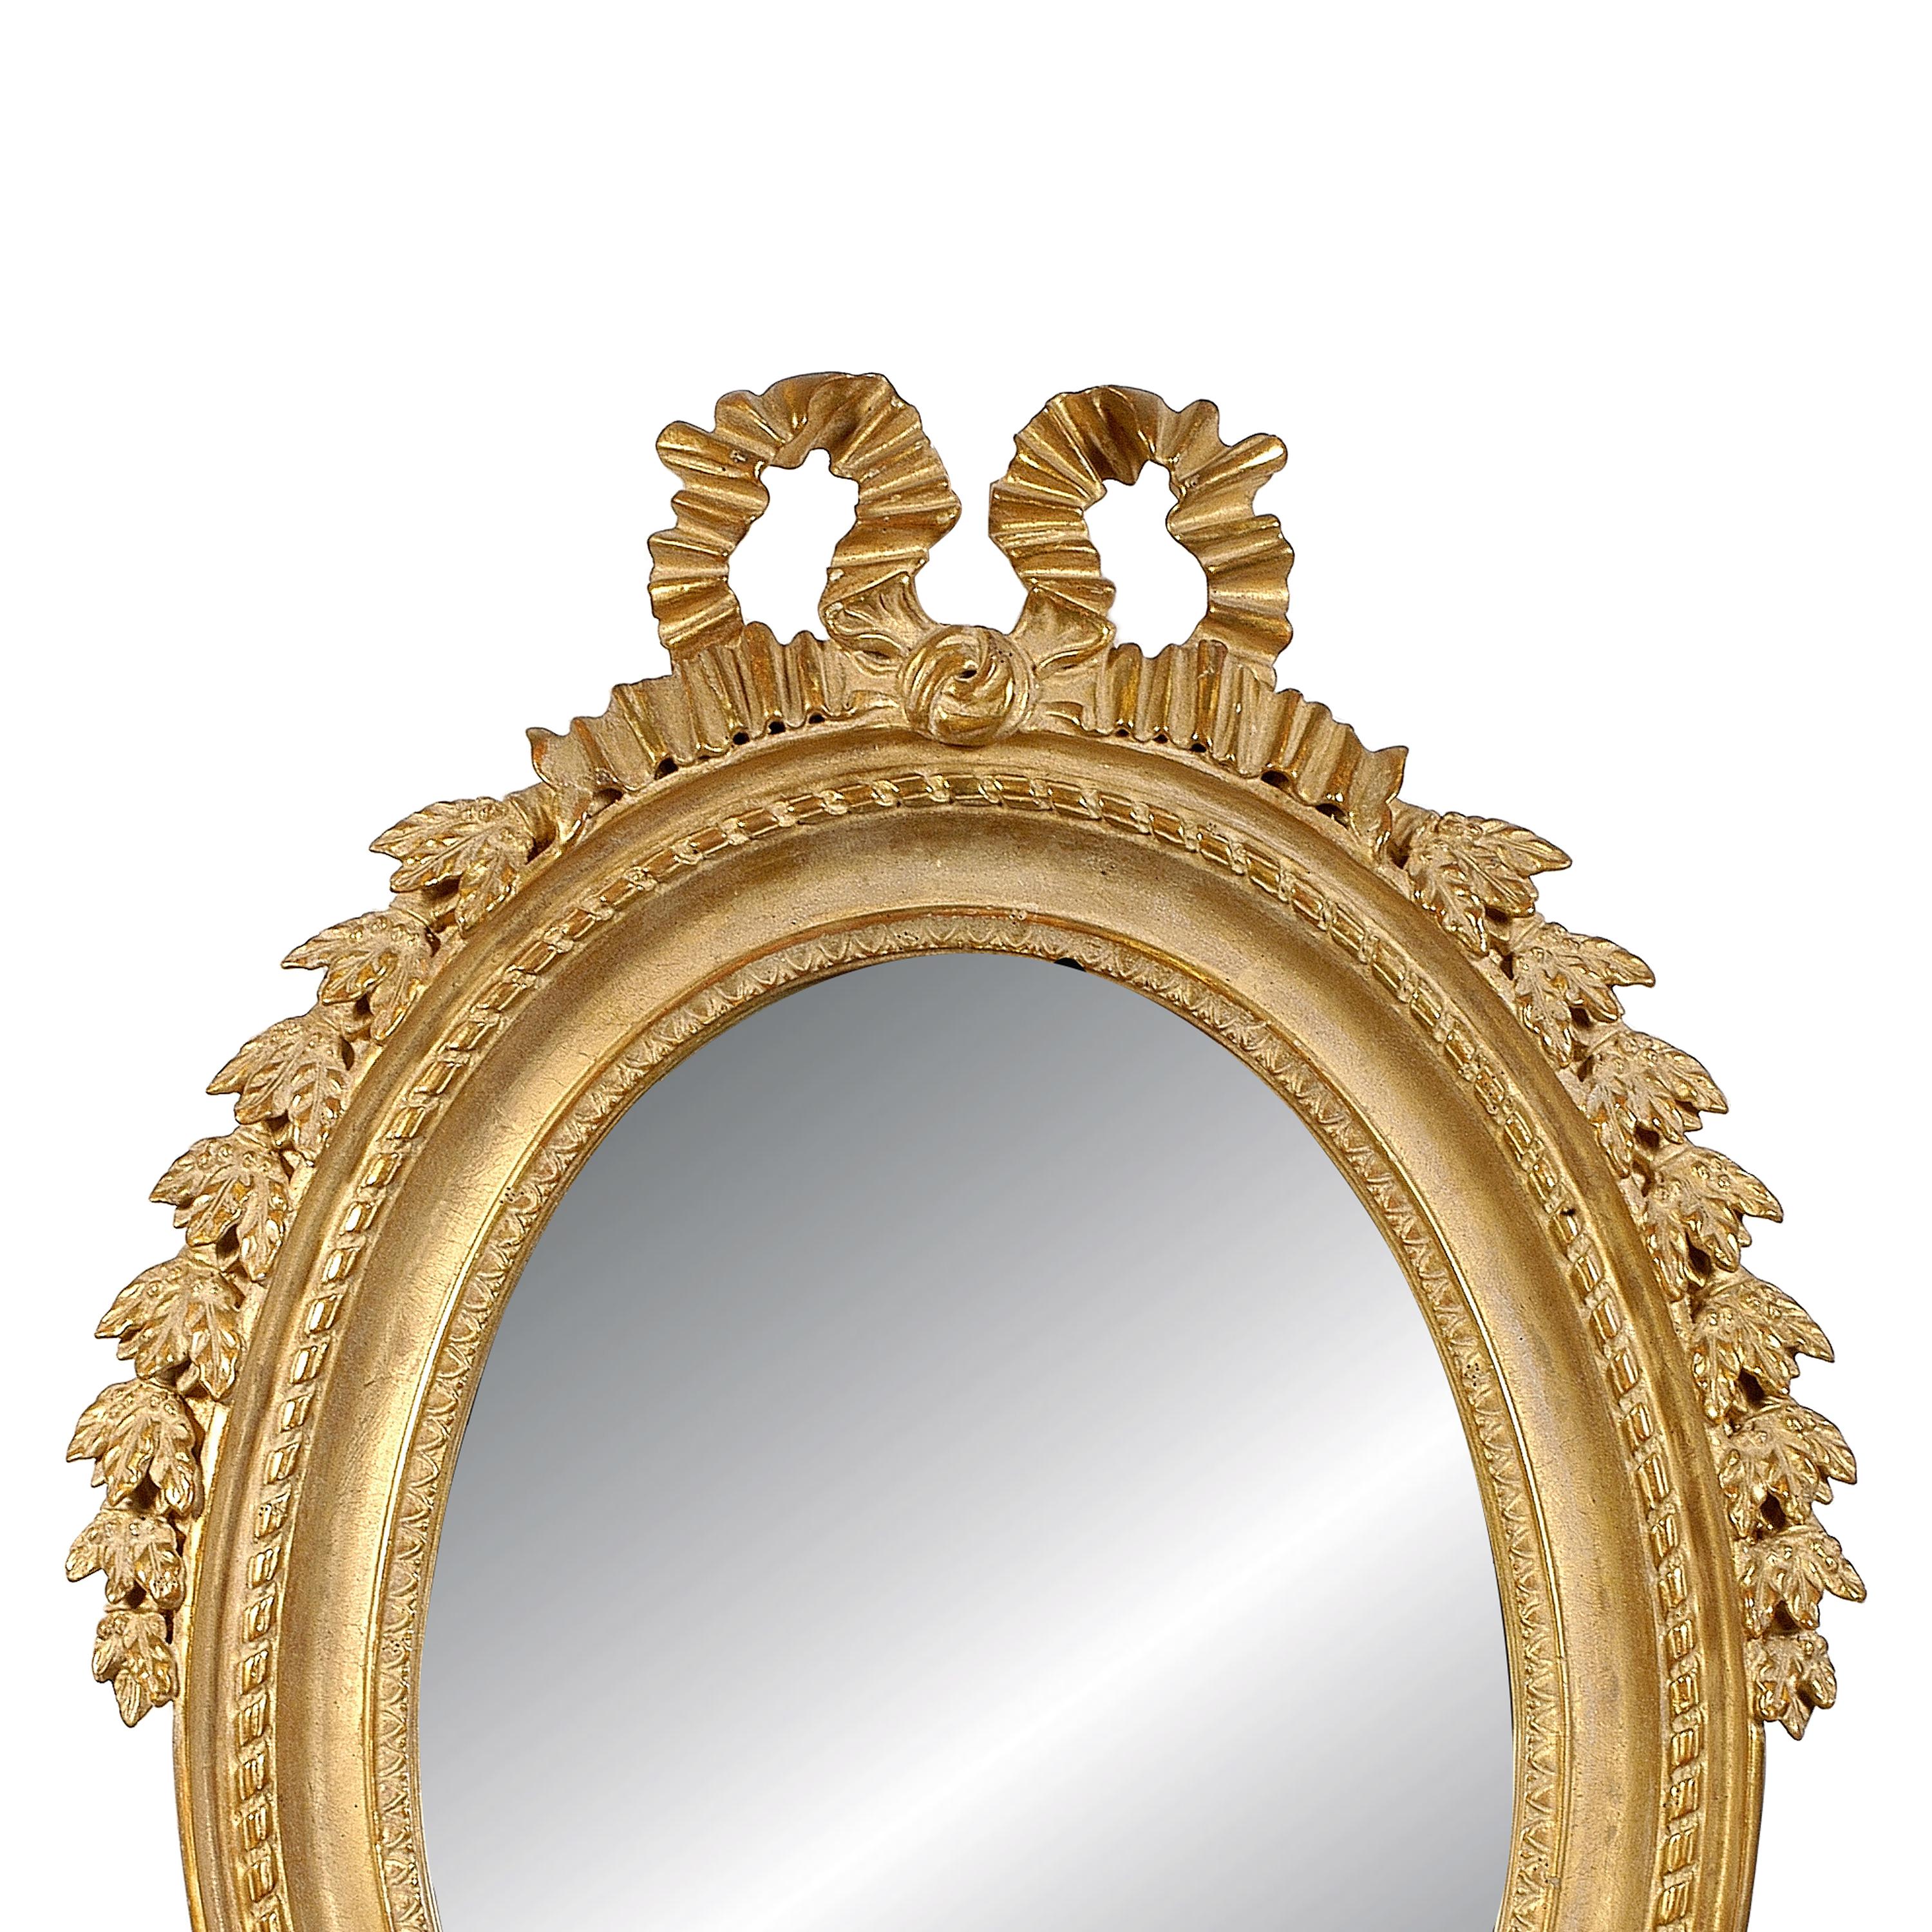 Neoclassical Regency style handcrafted mirror. Round, acanthus leaf, hand carved wooden structure with gold foil finished. Spain, 1970.